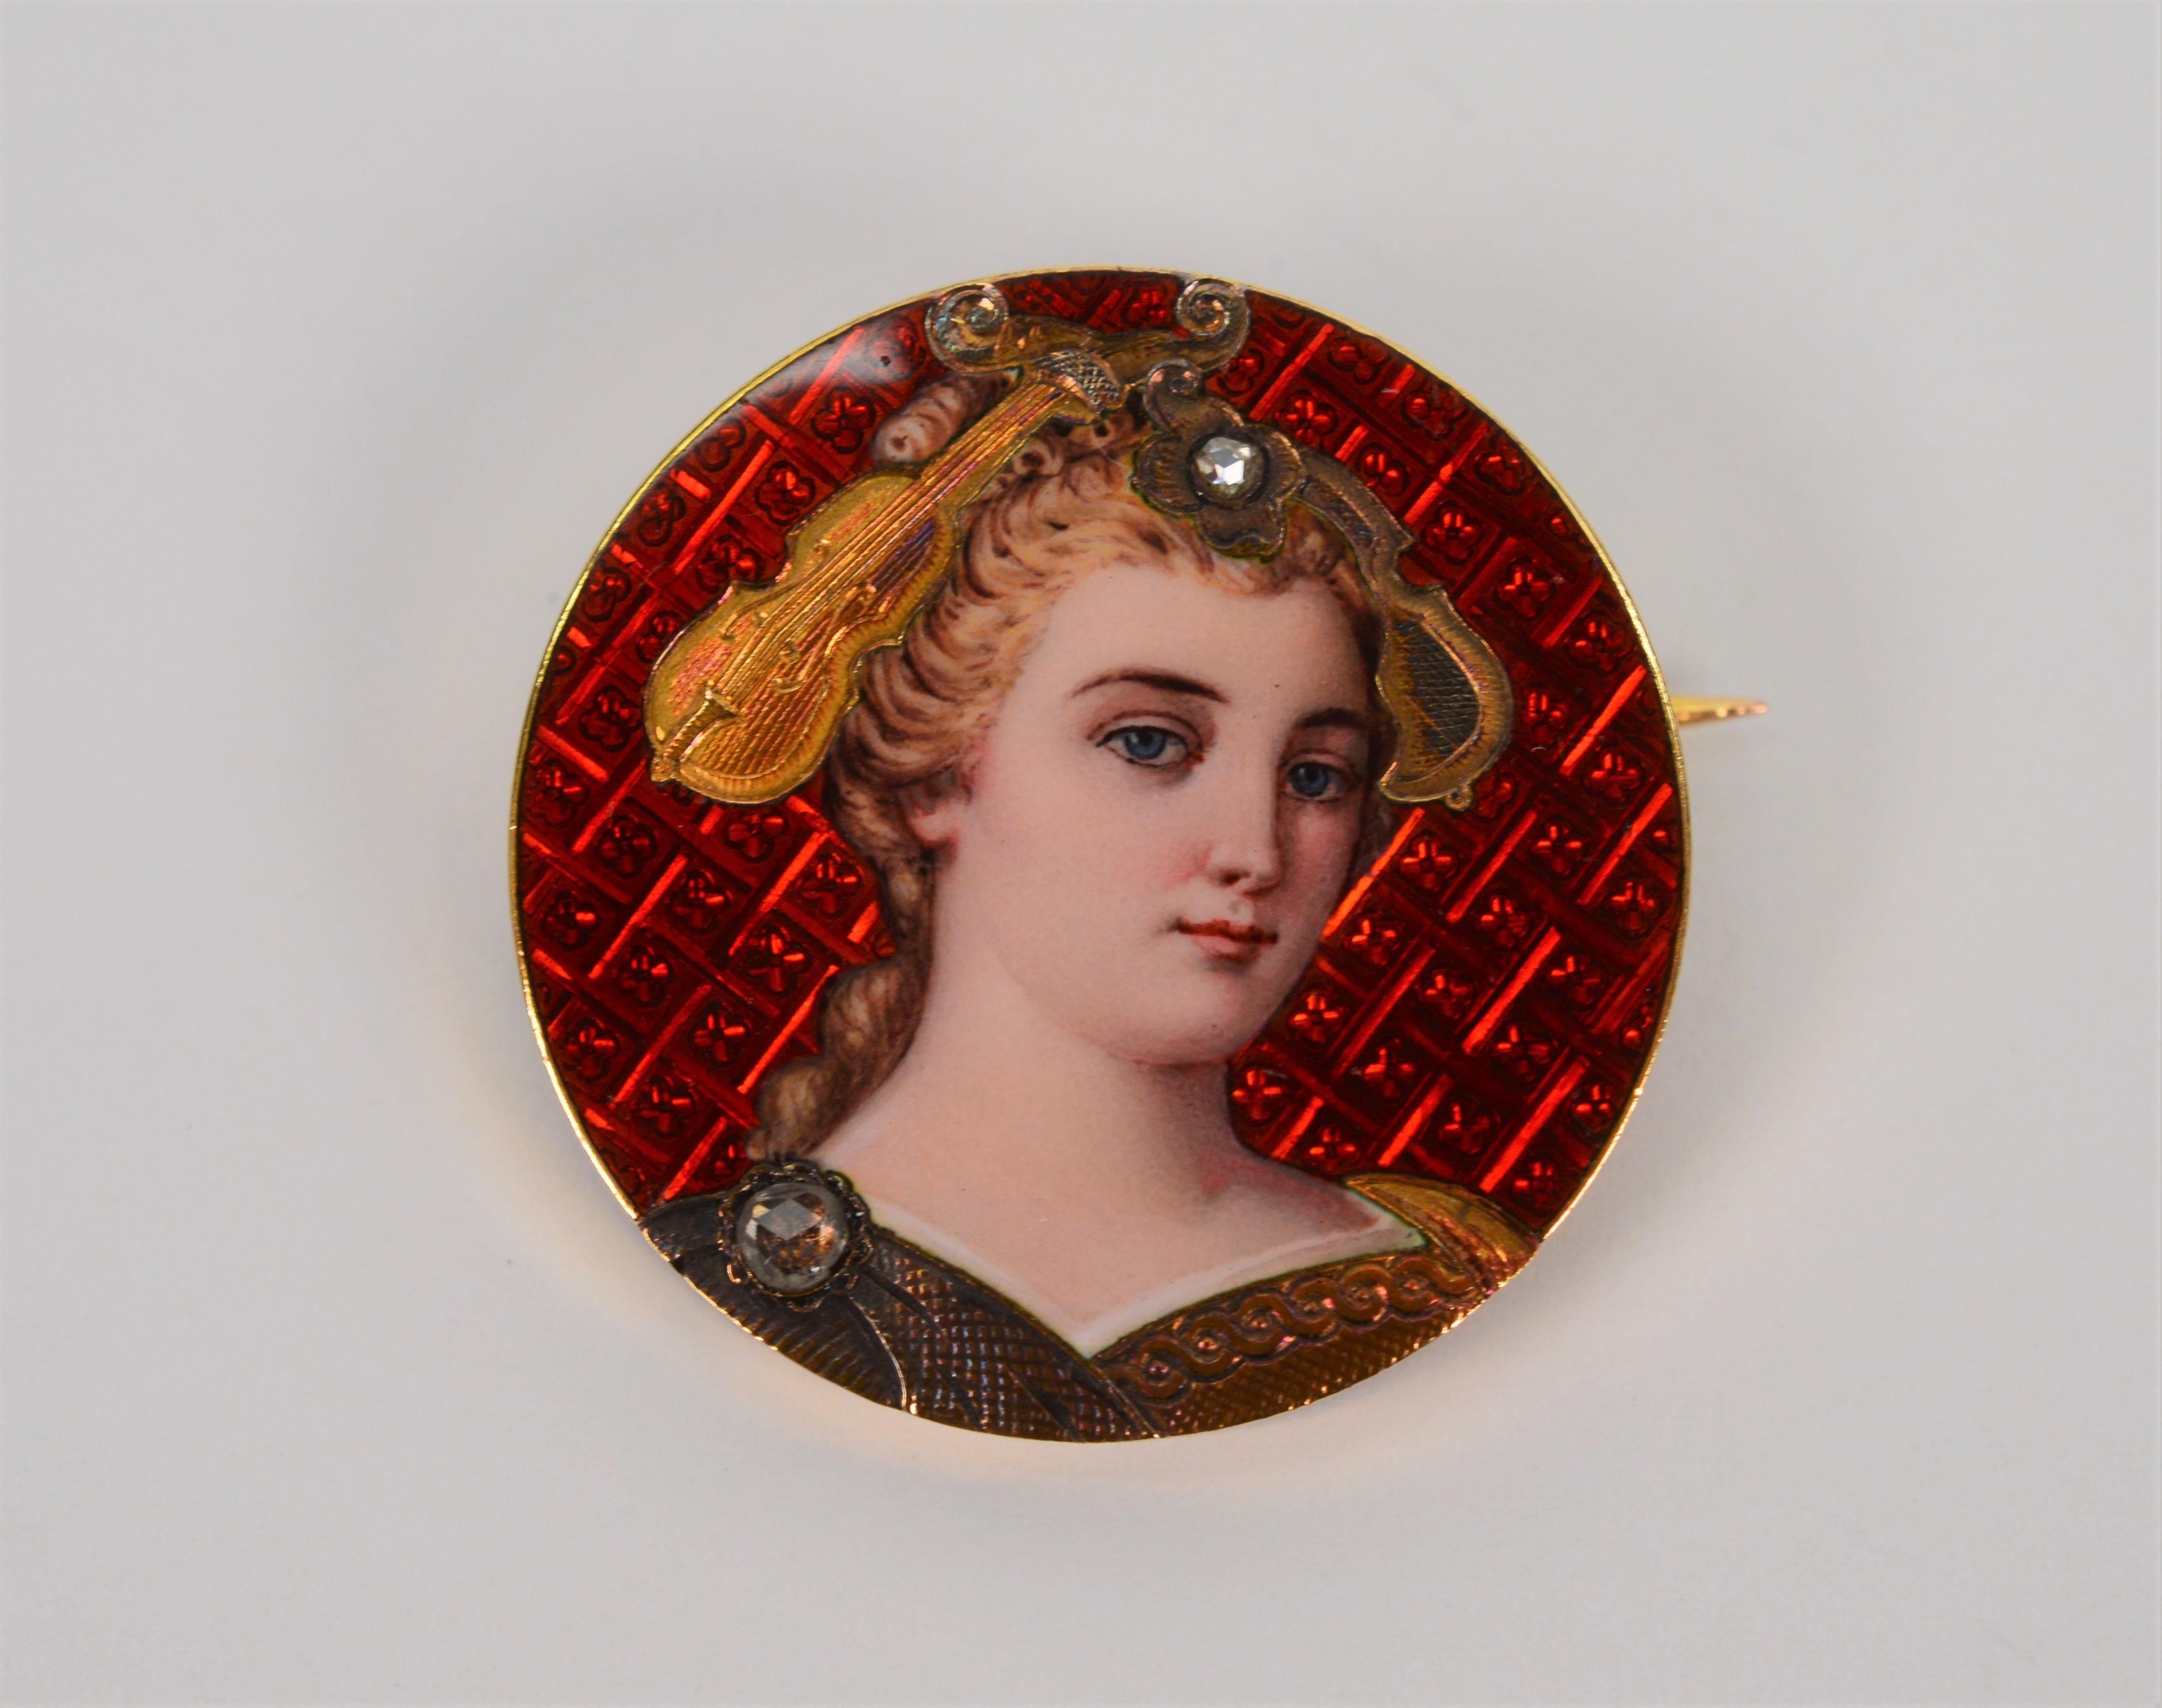 Depicting the elegance and grace of a fine lady of the late 1800, this romantic French antique portrait brooch is skillfully hand painted and crafted guilloche enamel. Two rose cut diamonds adorn the angelic image of her dressed in finery. In